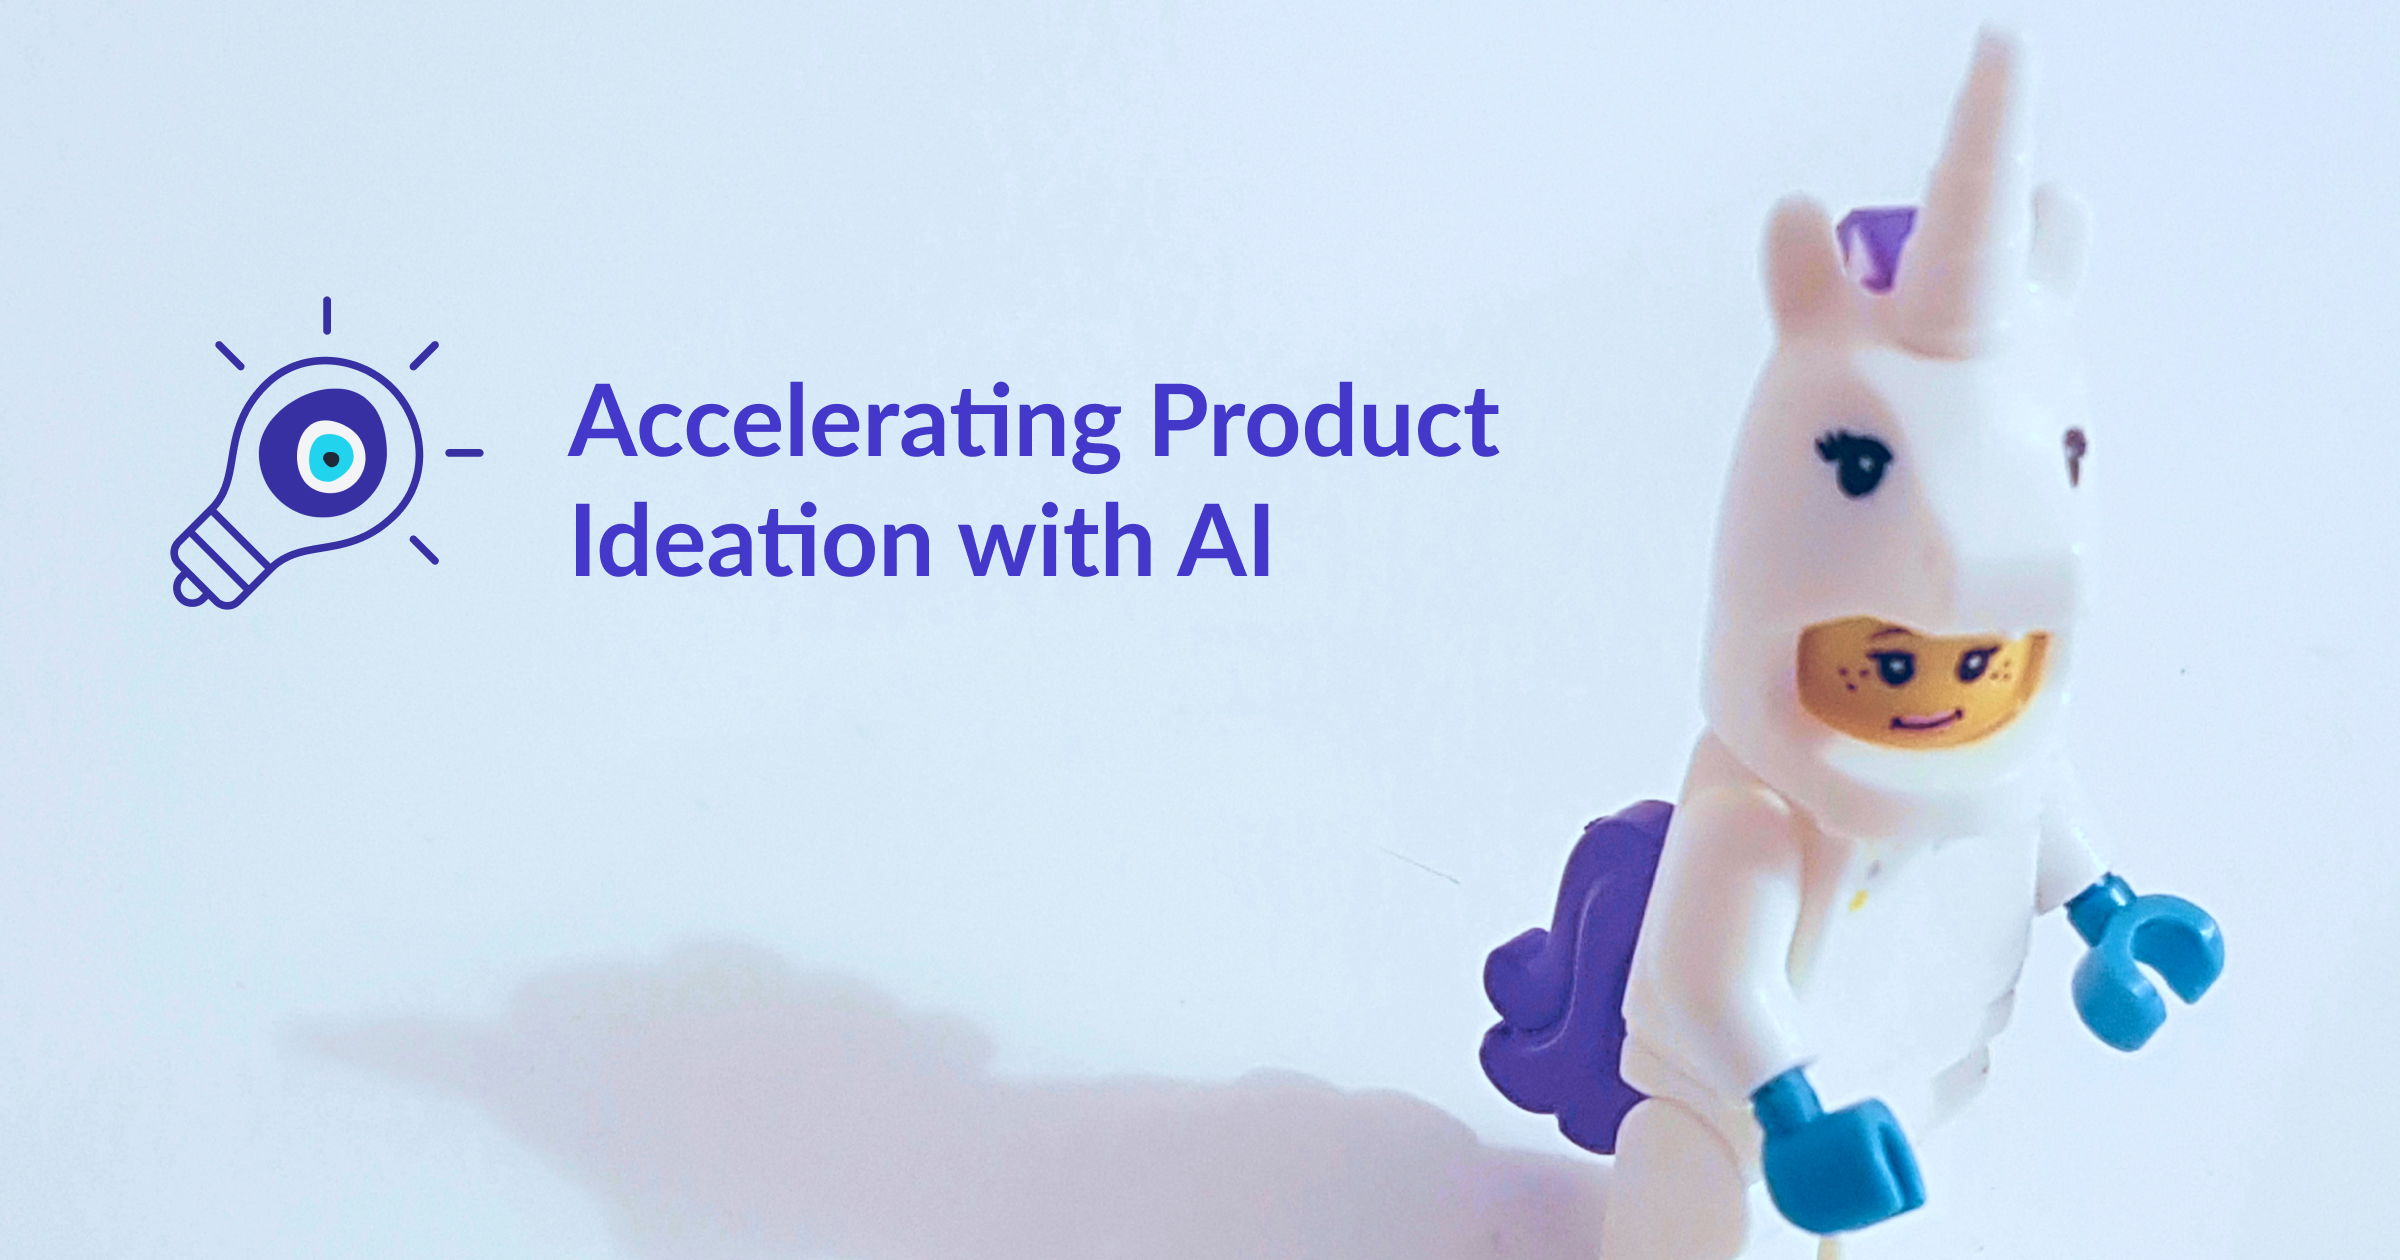 Text saying "Accelerating product ideation with AI" and image of a lego character dressed as a unicorn